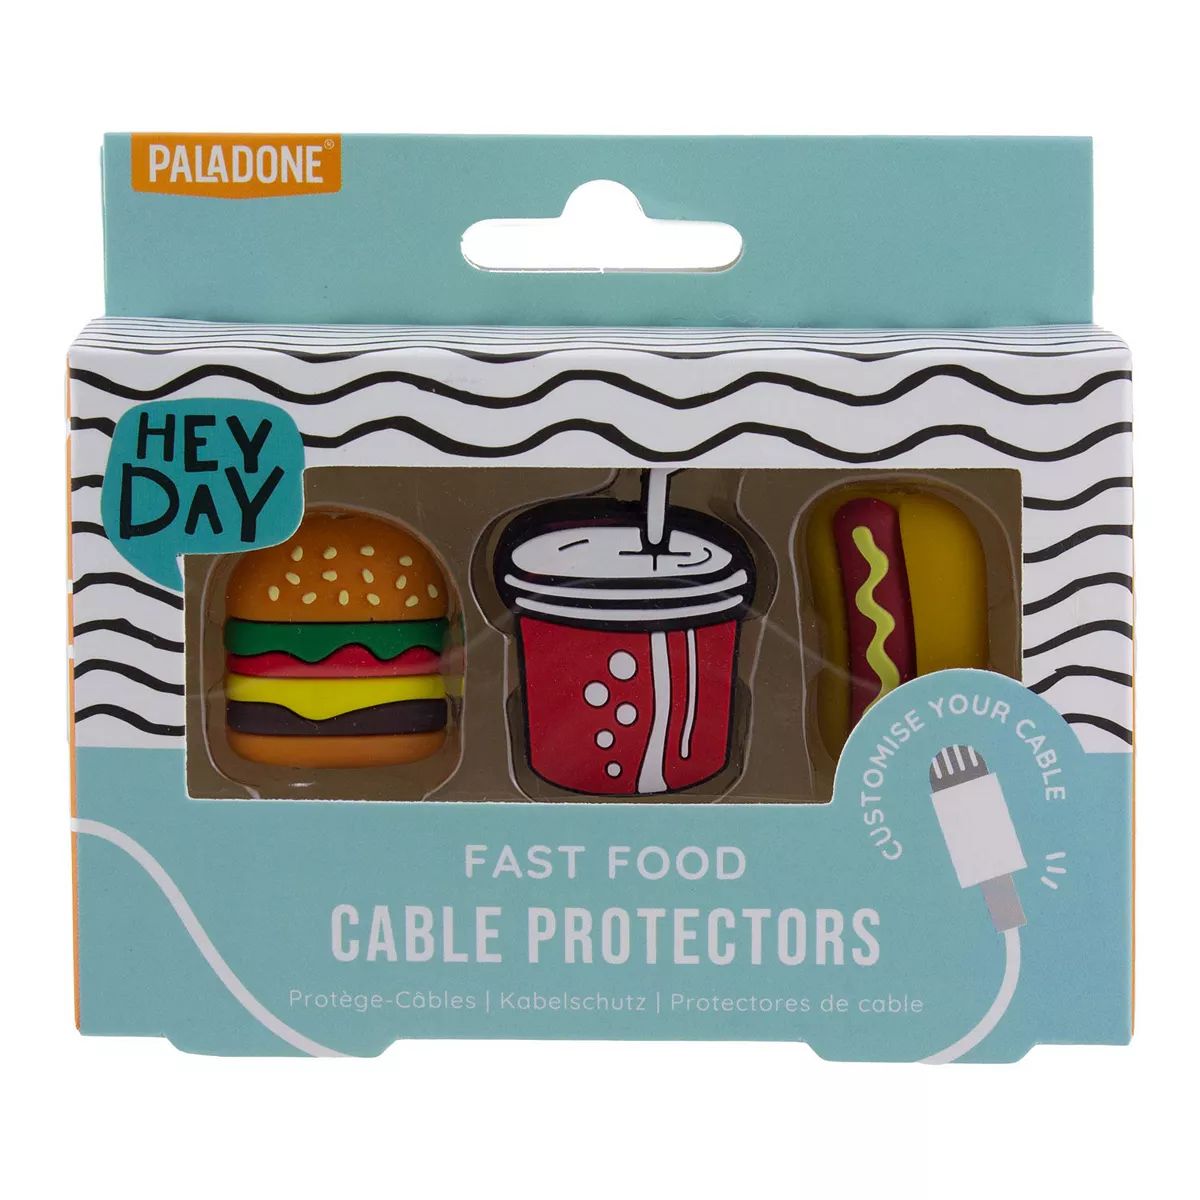 Paladone Fast Food Cable Protectors | Kohl's